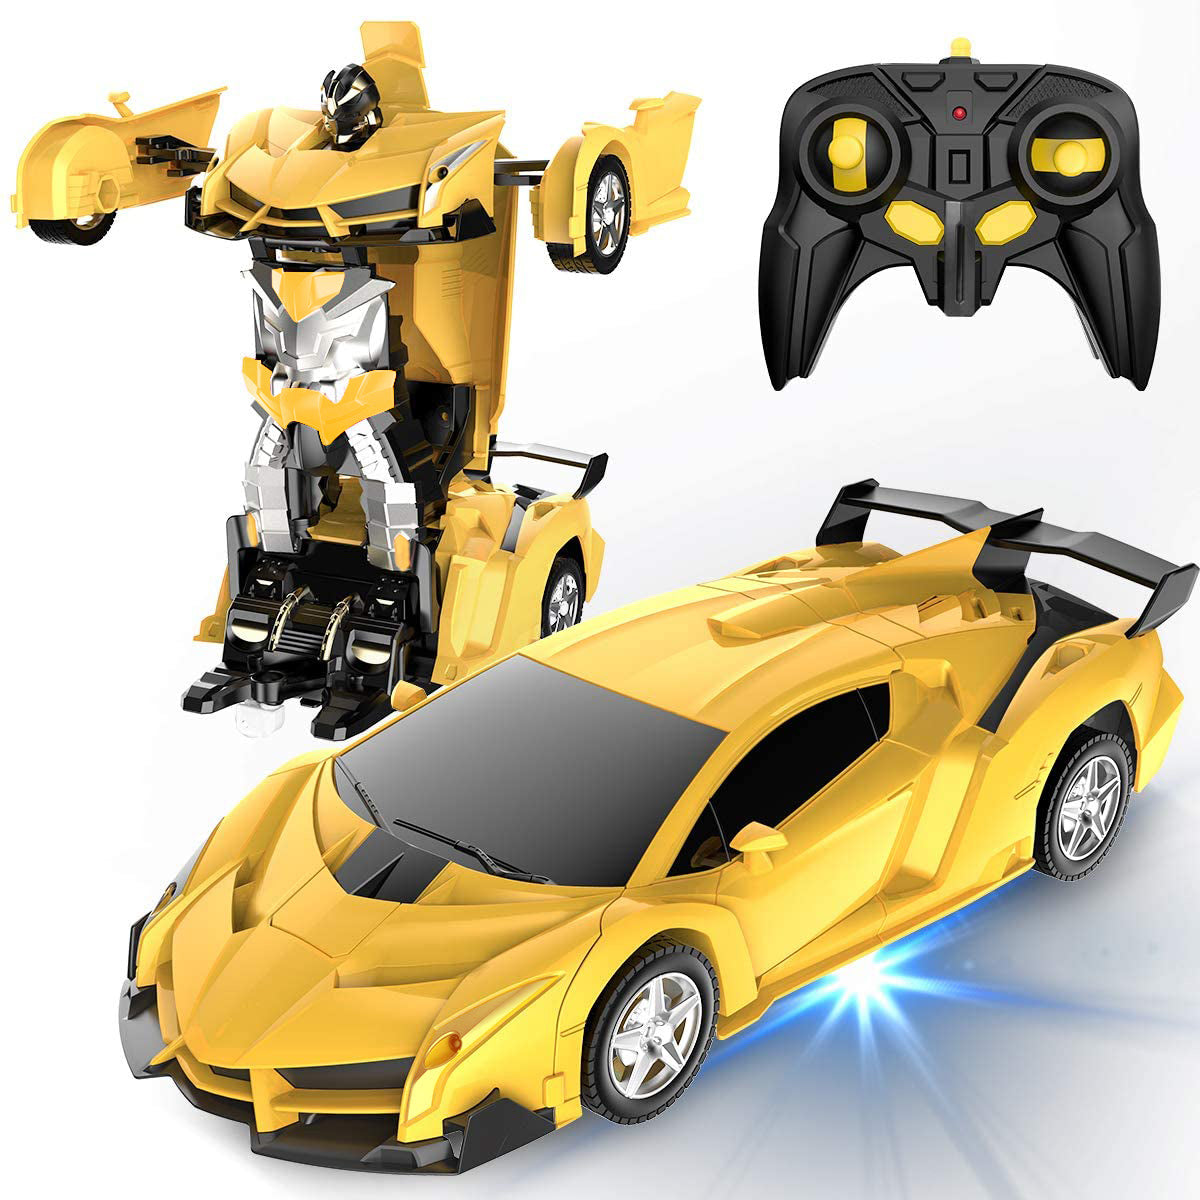 LATEST - Hand/RC Transform Car Robot Gesture Induction Deformation Vehicle Car Deform Robot Yellow with 360° Rotating Stunt Womdee 2-in-1 Remote Control Deformation Robot Car Toys for Kids